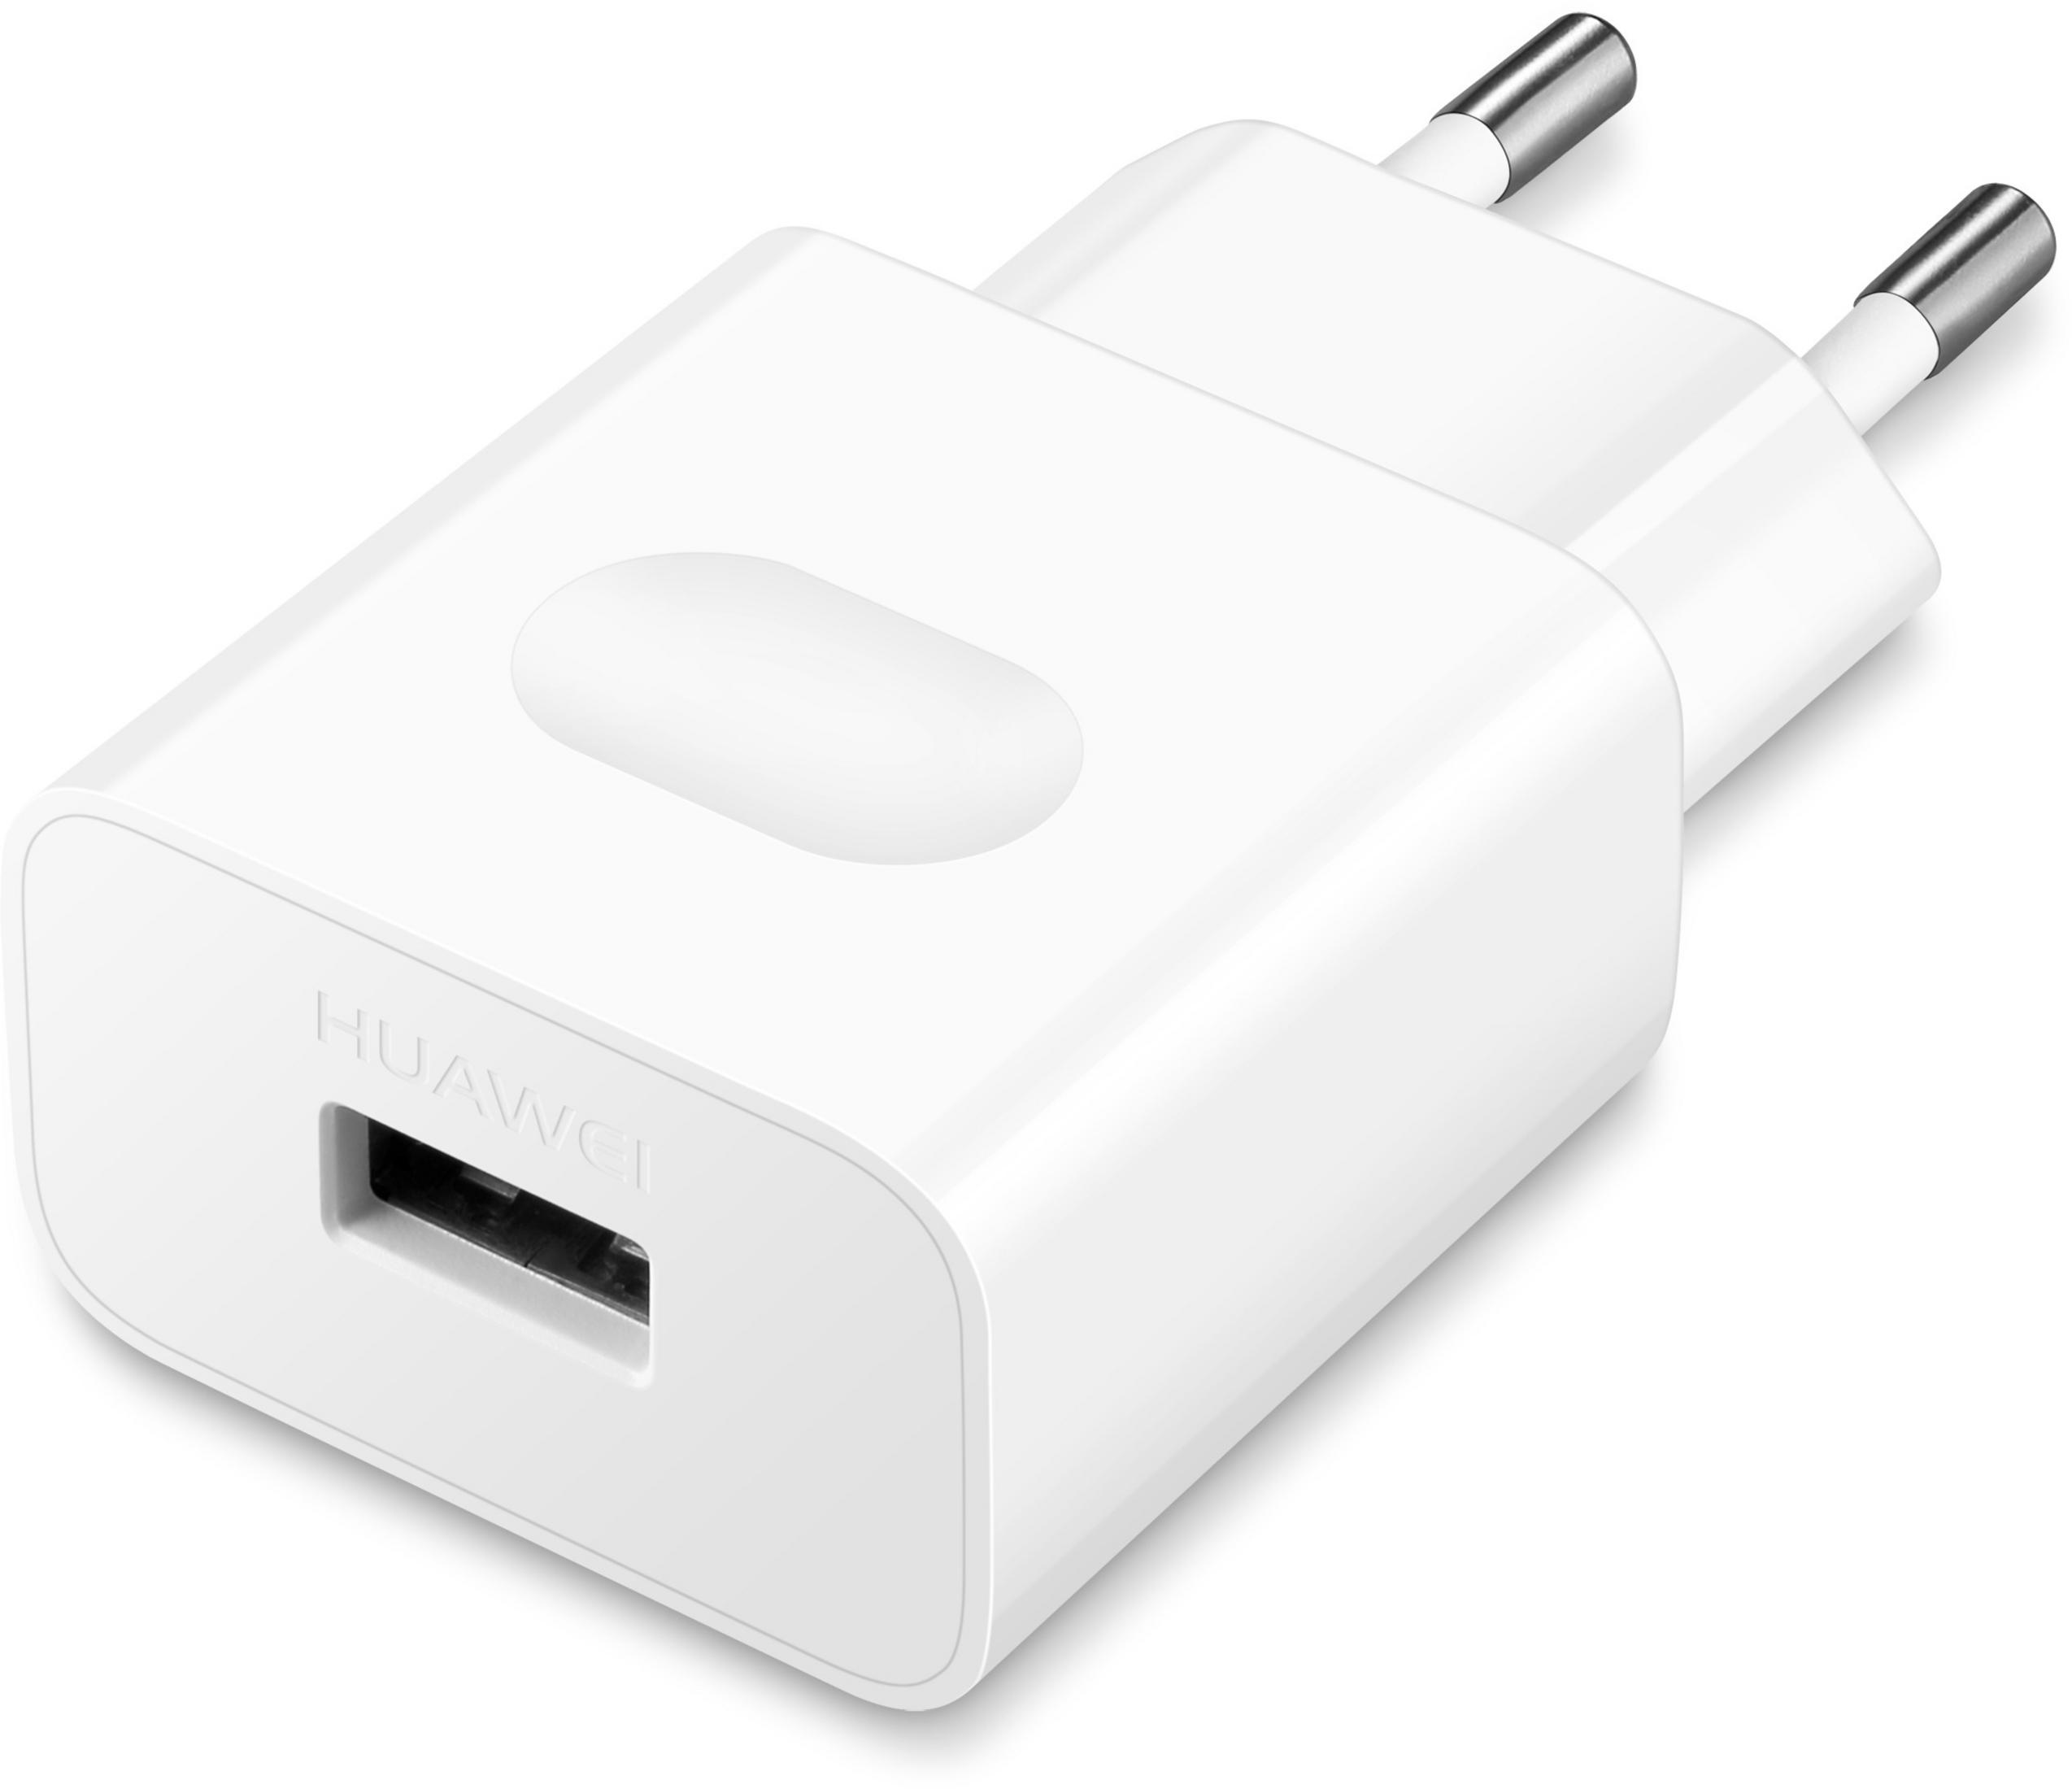 HUAWEI 190037 USB CHARGER AP32 Ladegerät 100 Volt, USB-C 240 - Weiß Universal, CABLE